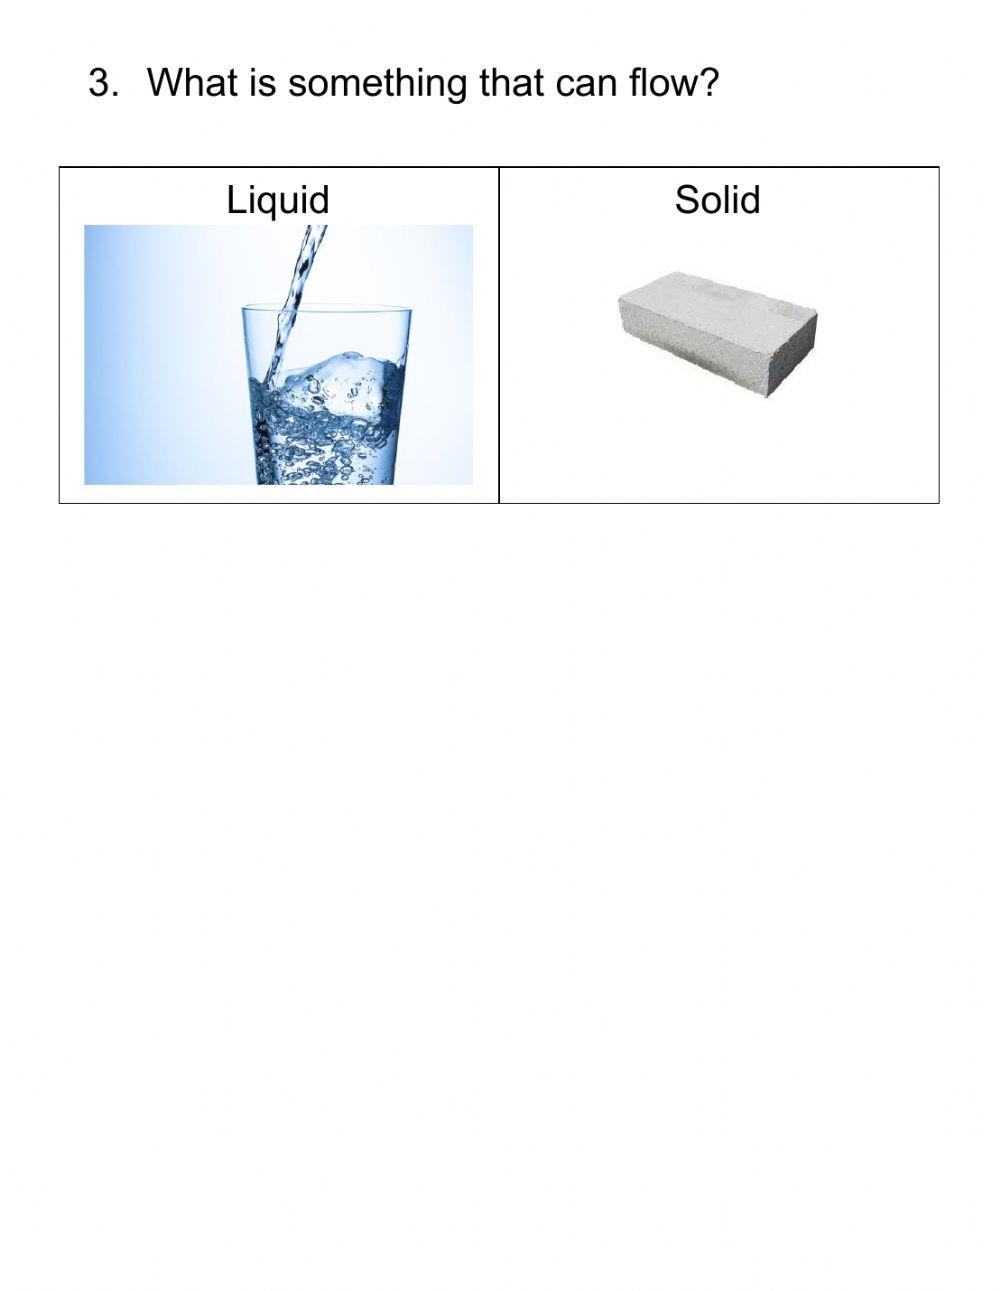 Solid, Liquid, and Gas